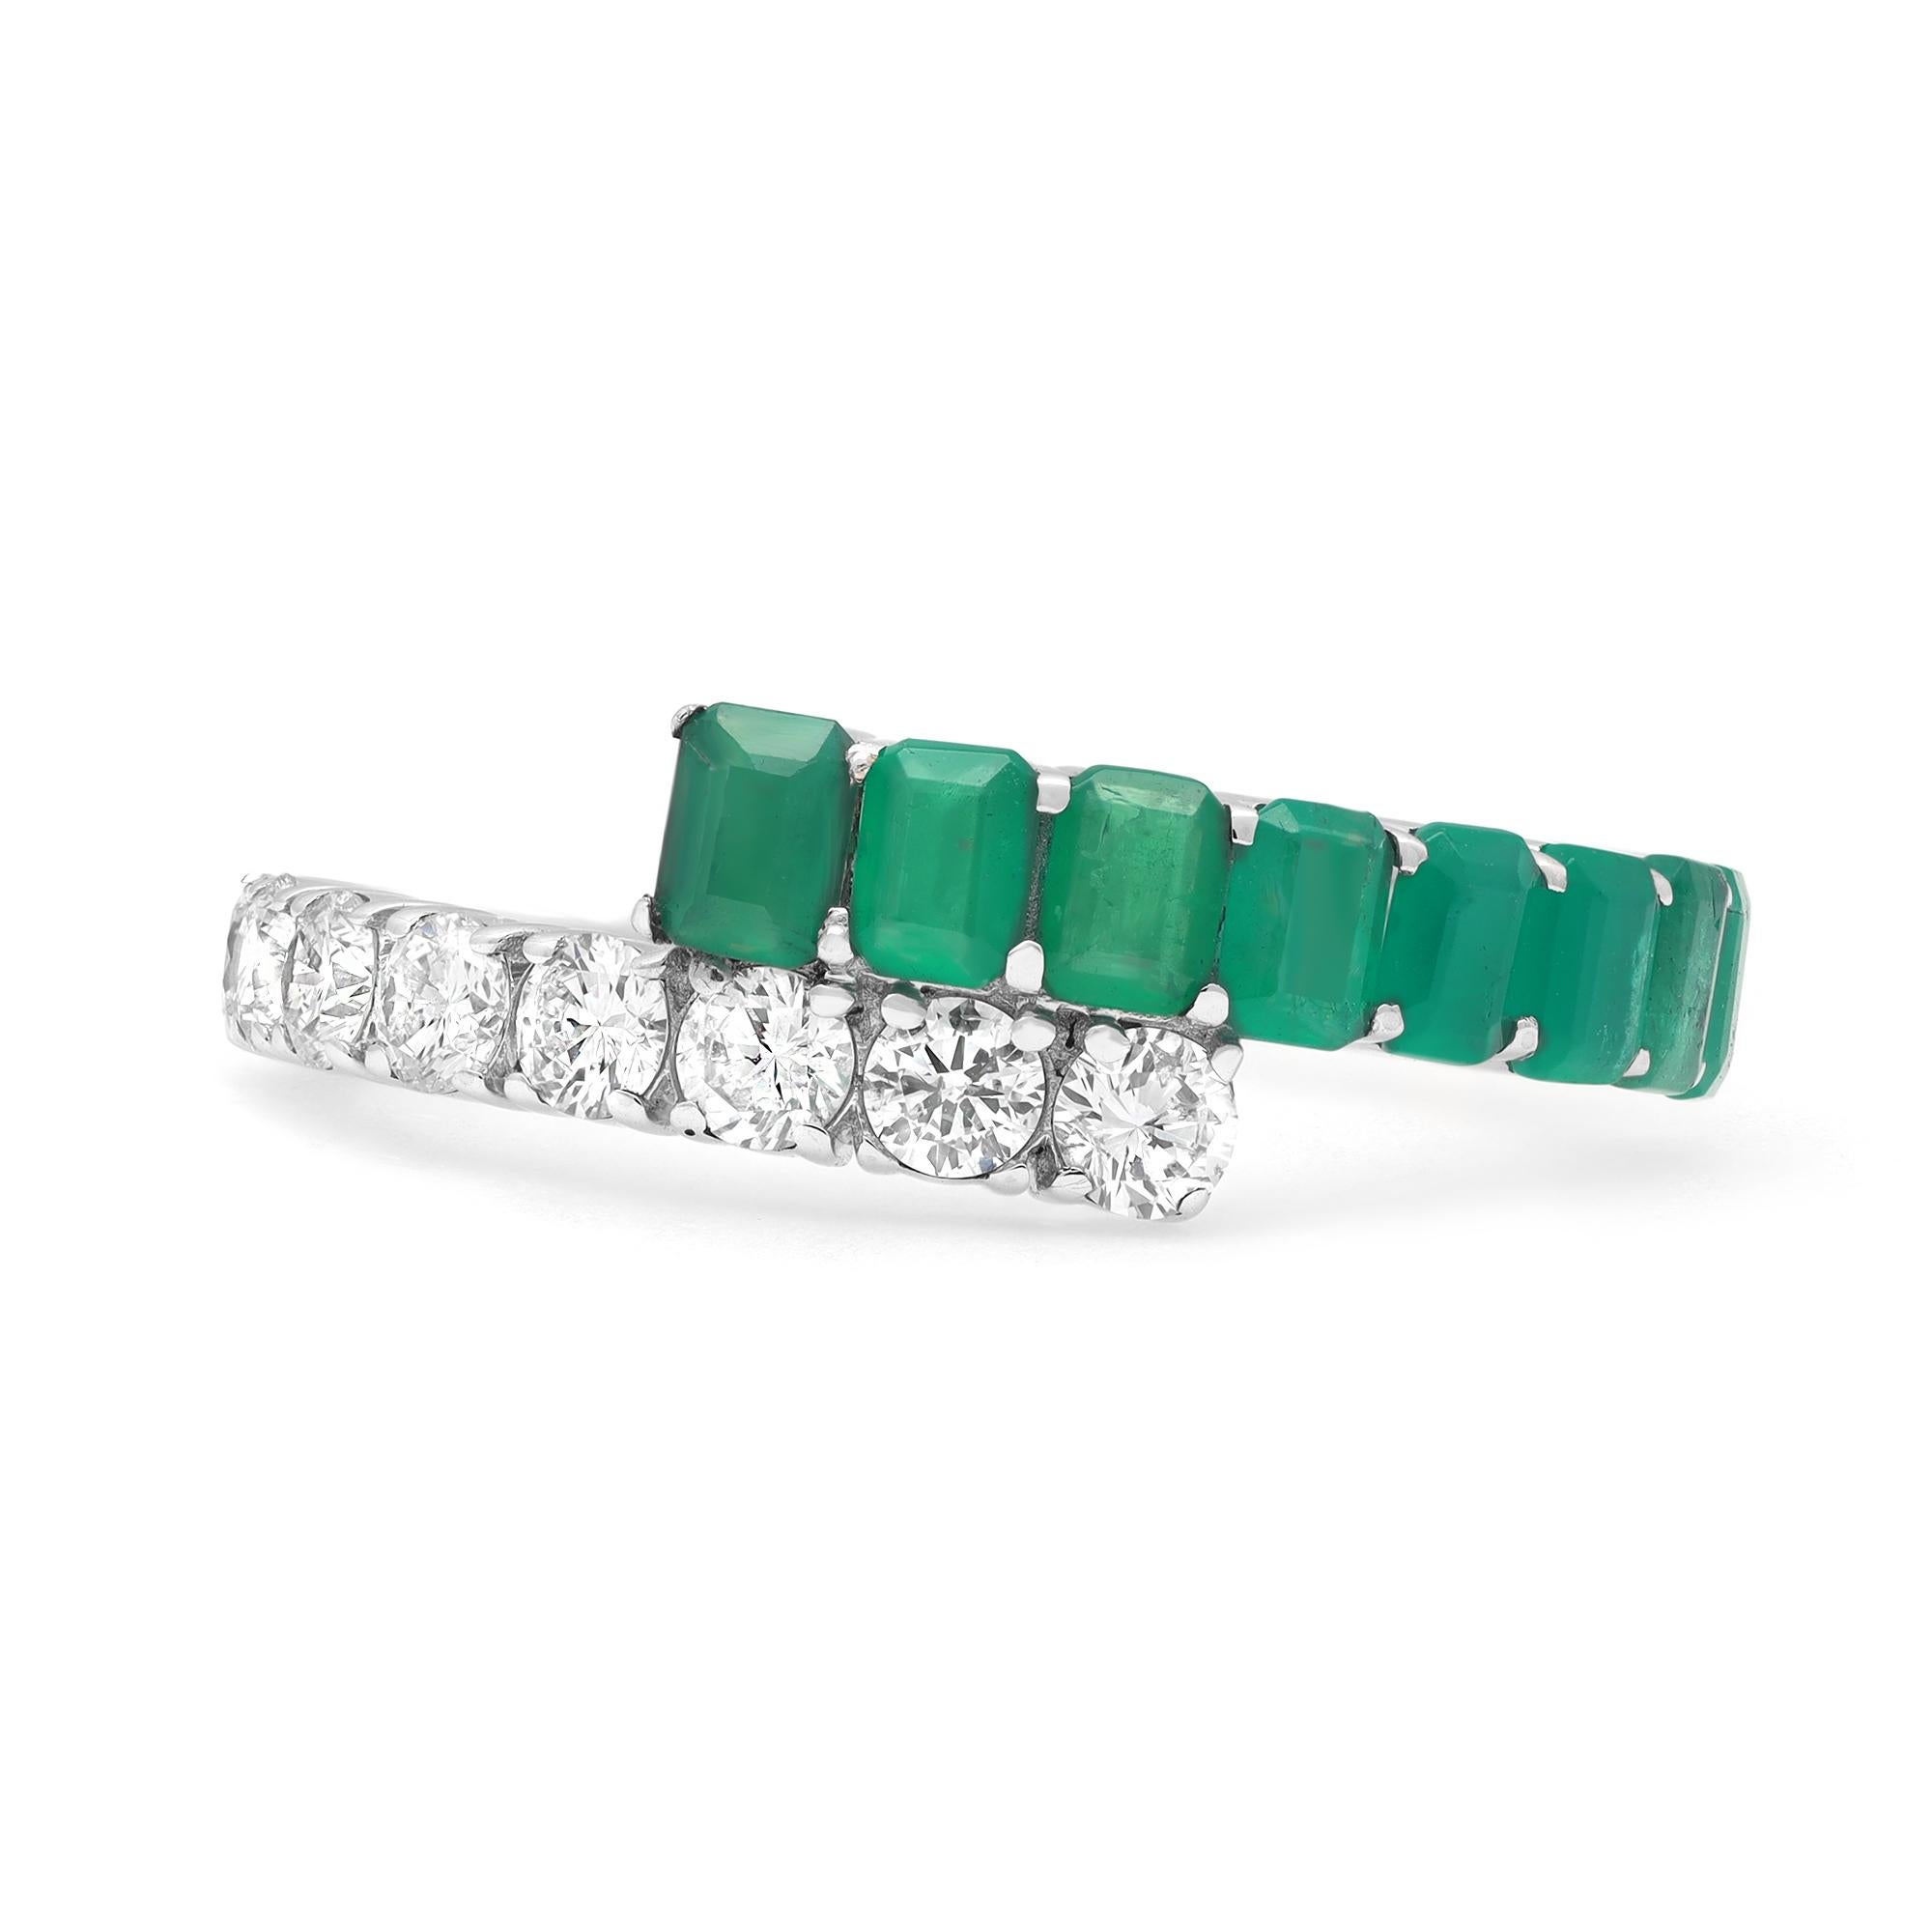 Simple and elegant, Green Emerald and diamond ladies ring. Crafted in high polished 14k white gold. It features two half rows of prong set 8 round brilliant cut diamonds and 8 Emerald Cut Emeralds for a timeless, eye catchy style. Total diamond